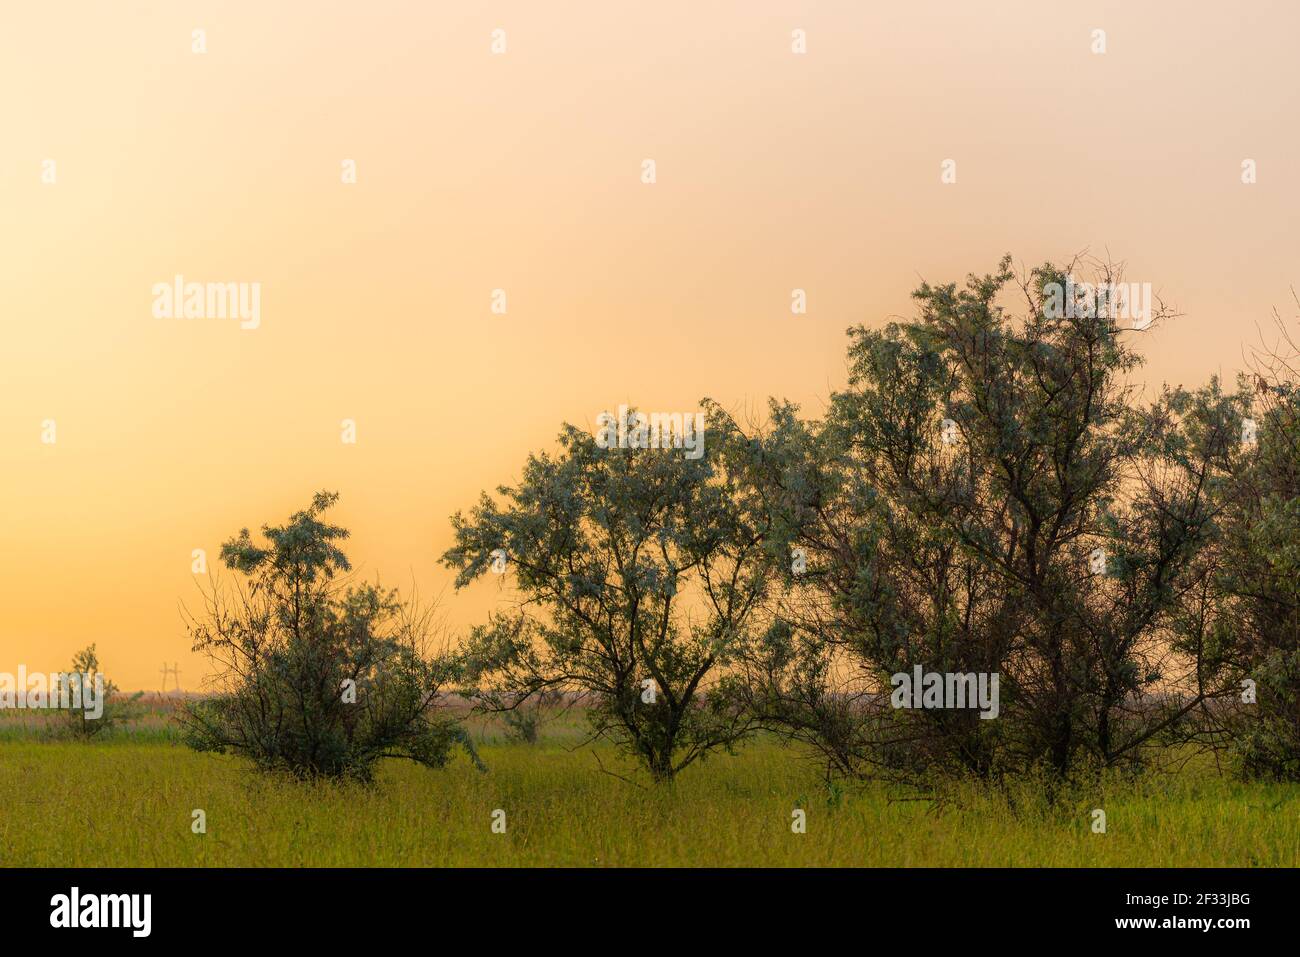 The silhouette of the lush crown of Elaeagnus commutata tree at sunset, in the background the sky with warm colors of the sun going down. Orange backl Stock Photo